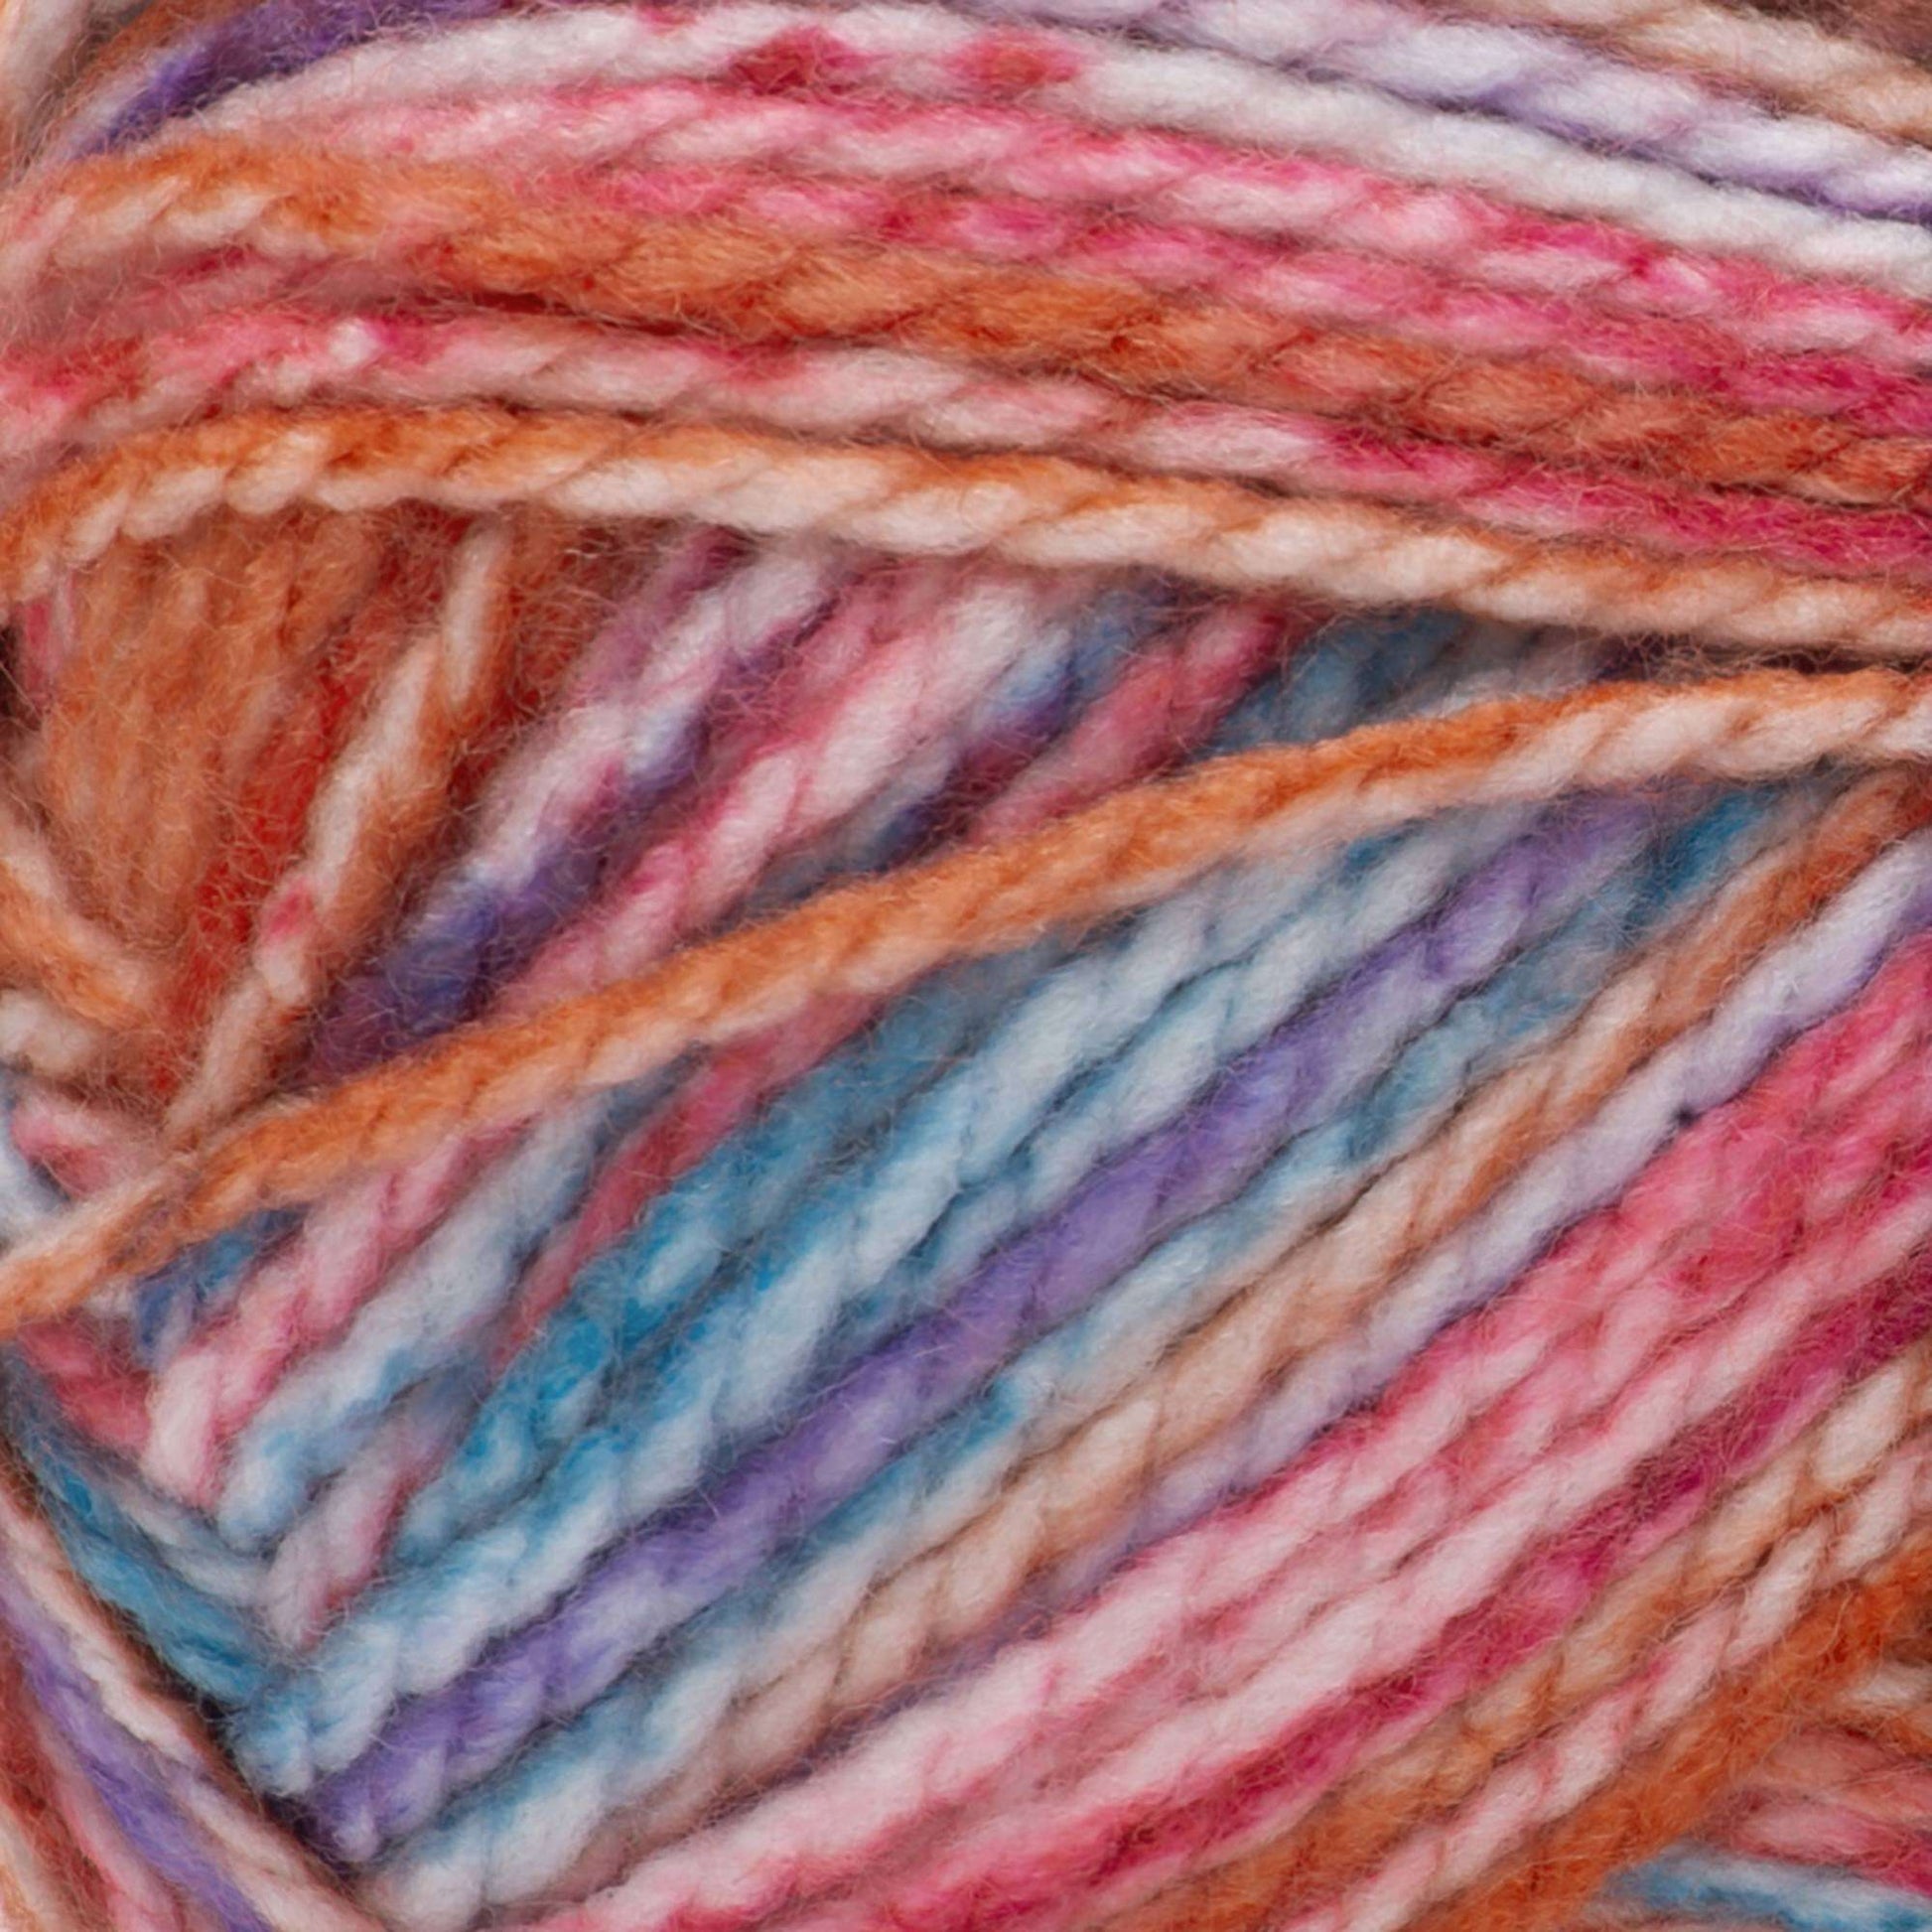 Red Heart Hopscotch Yarn - Discontinued Shades